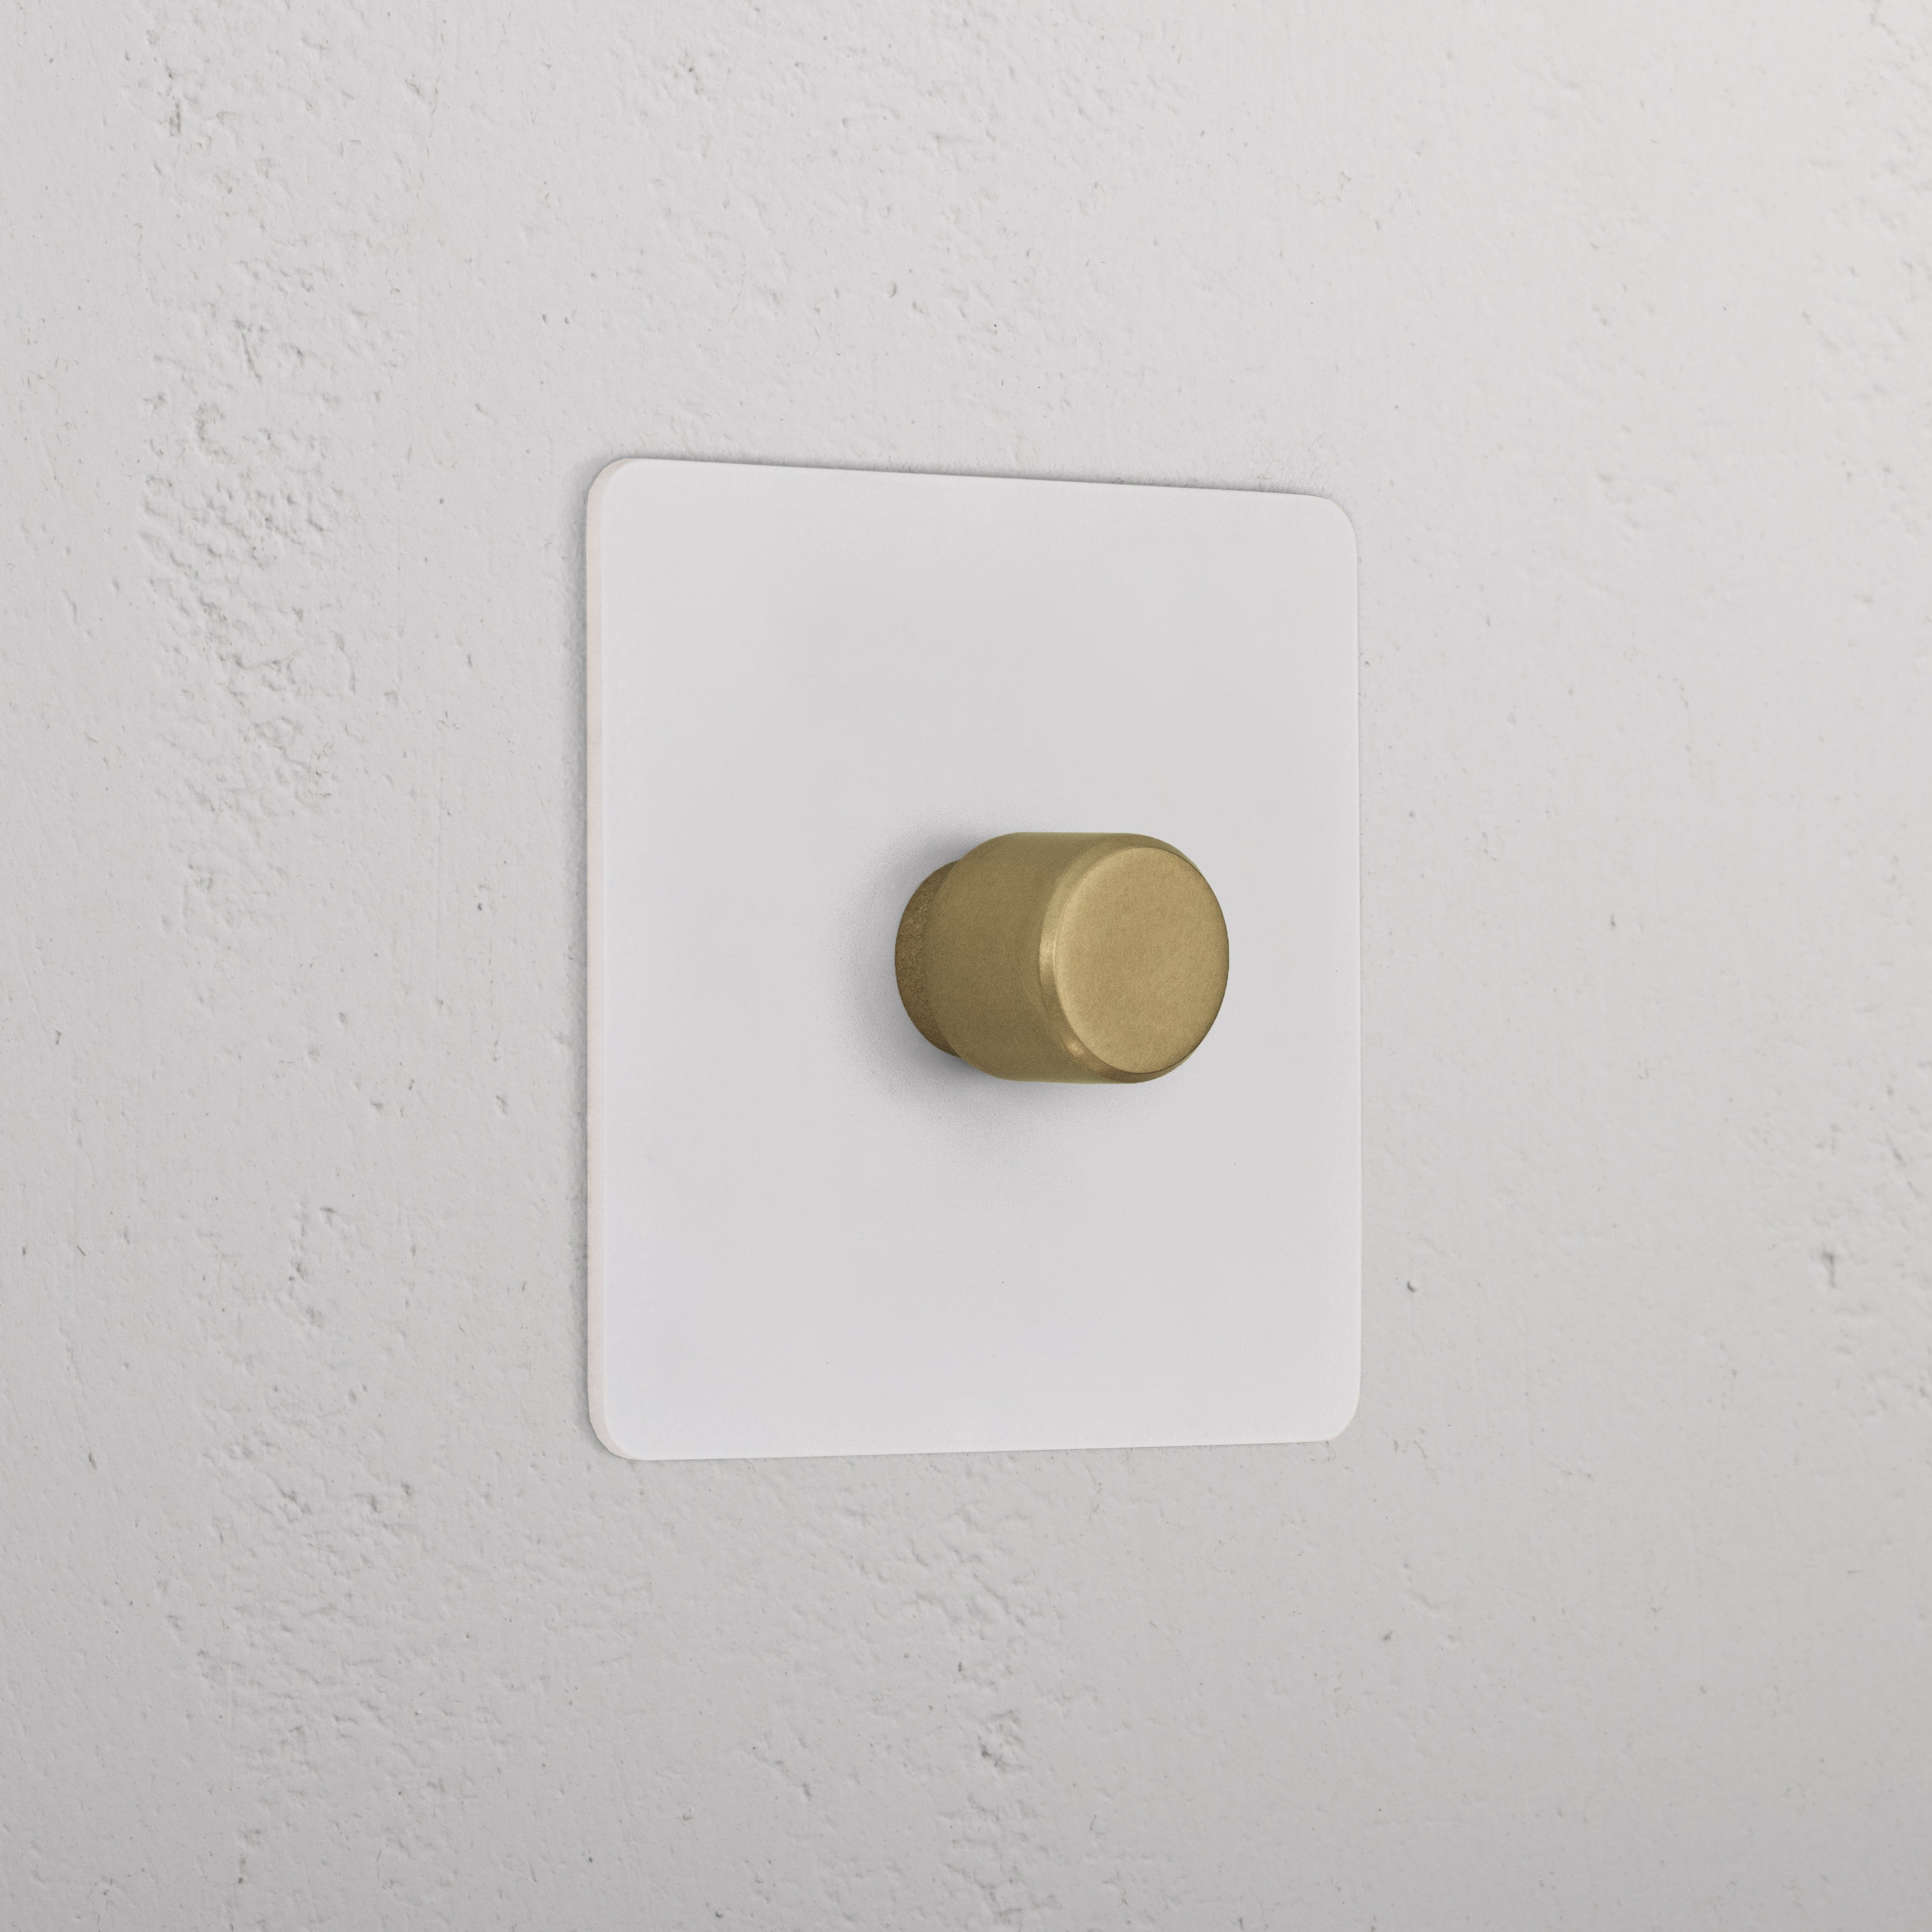 1G Two Way Dimmer Switch _ Paintable Antique Brass